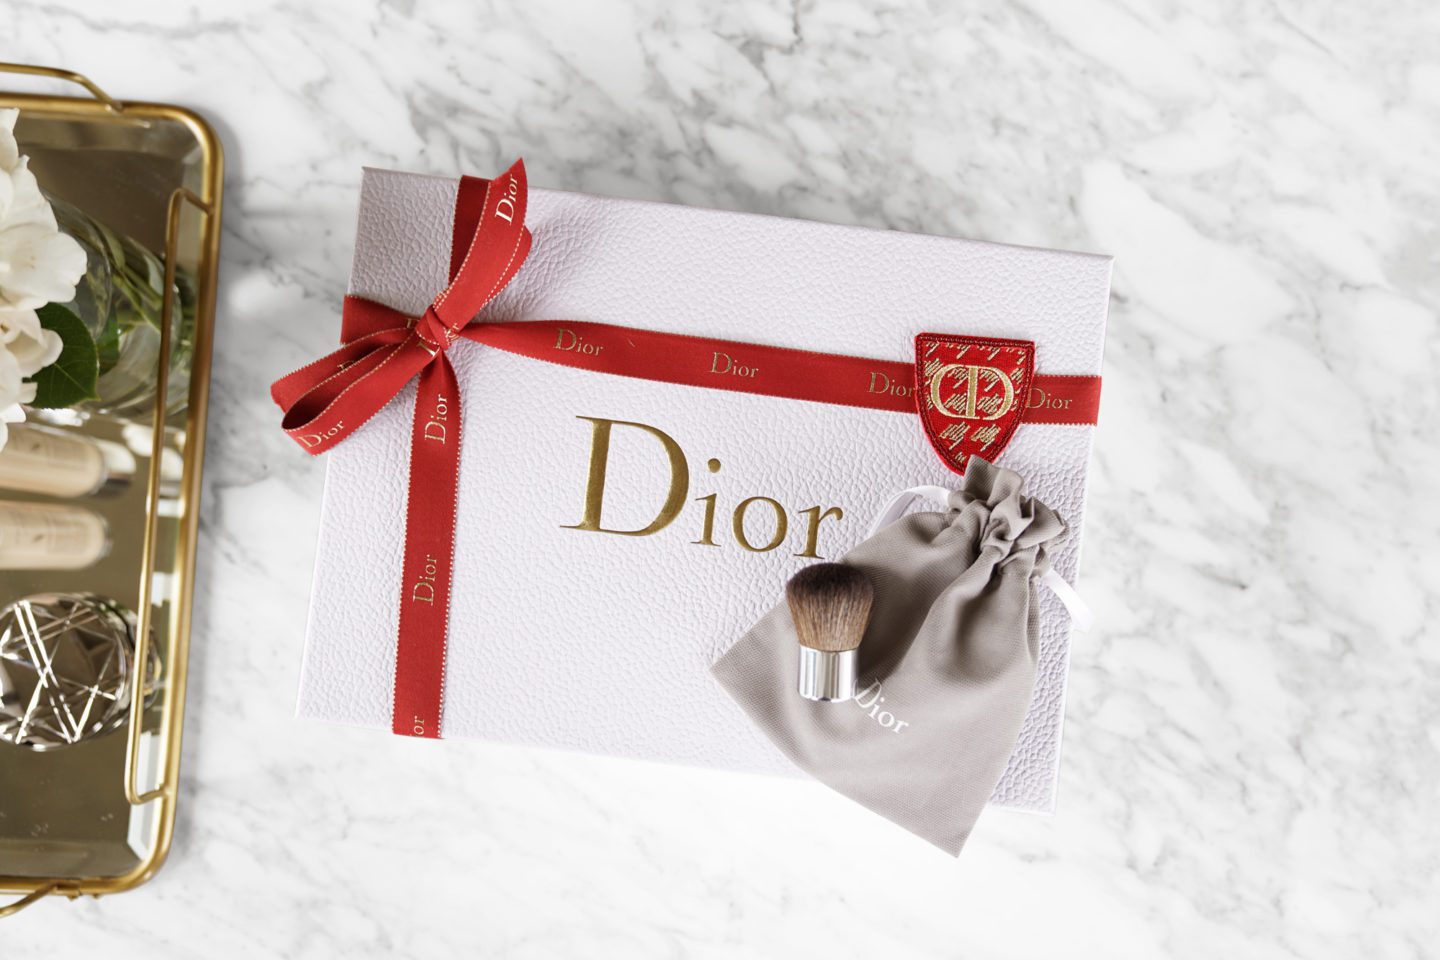 Dior Holiday Packaging and Airflash GWP